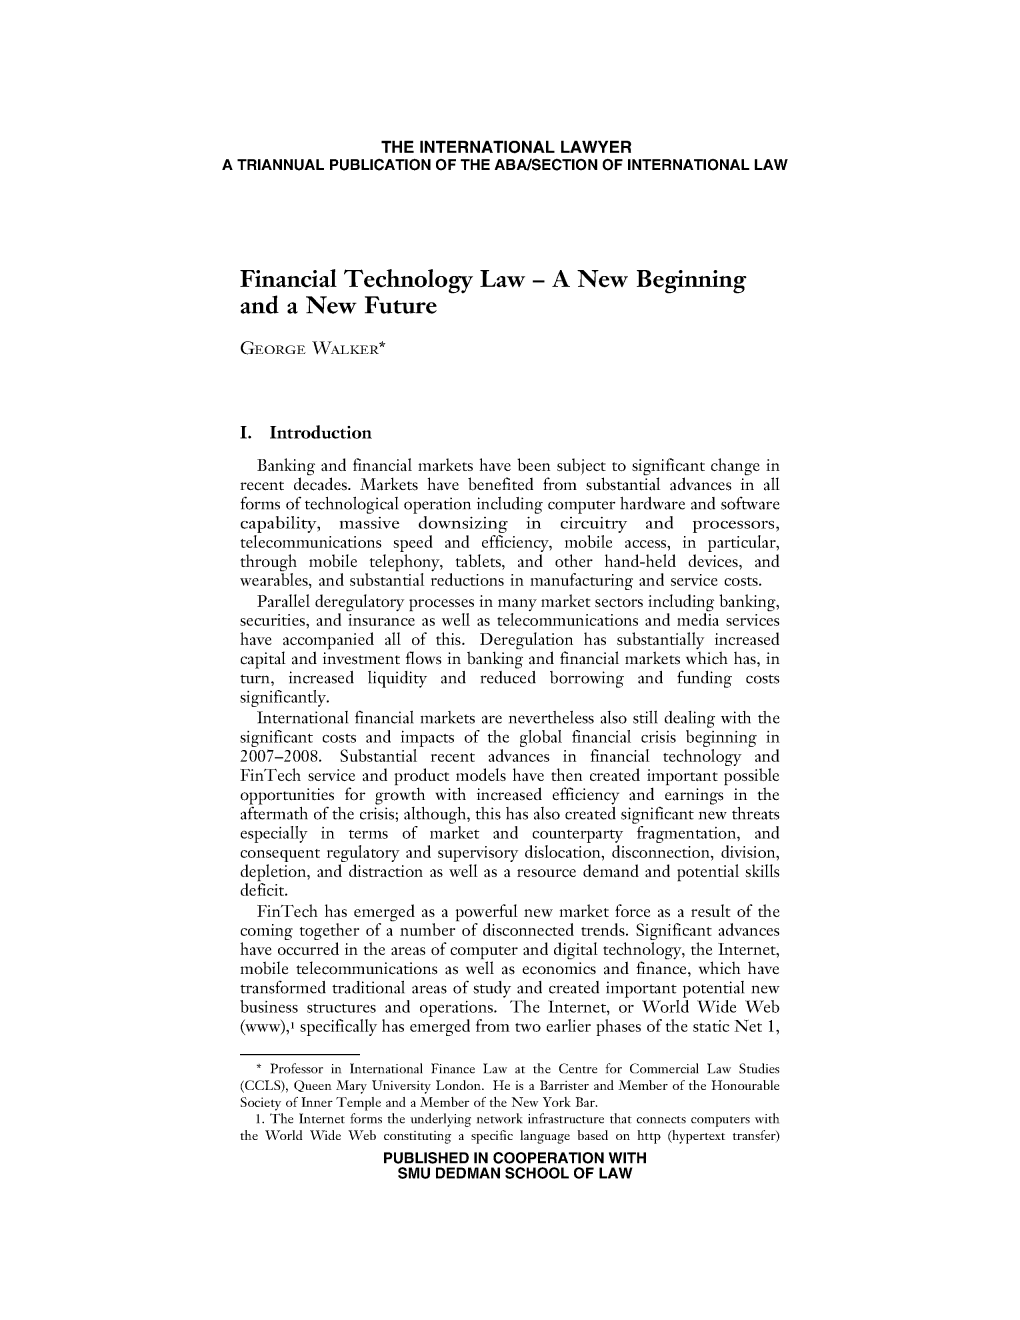 Financial Technology Law - a New Beginning and a New Future